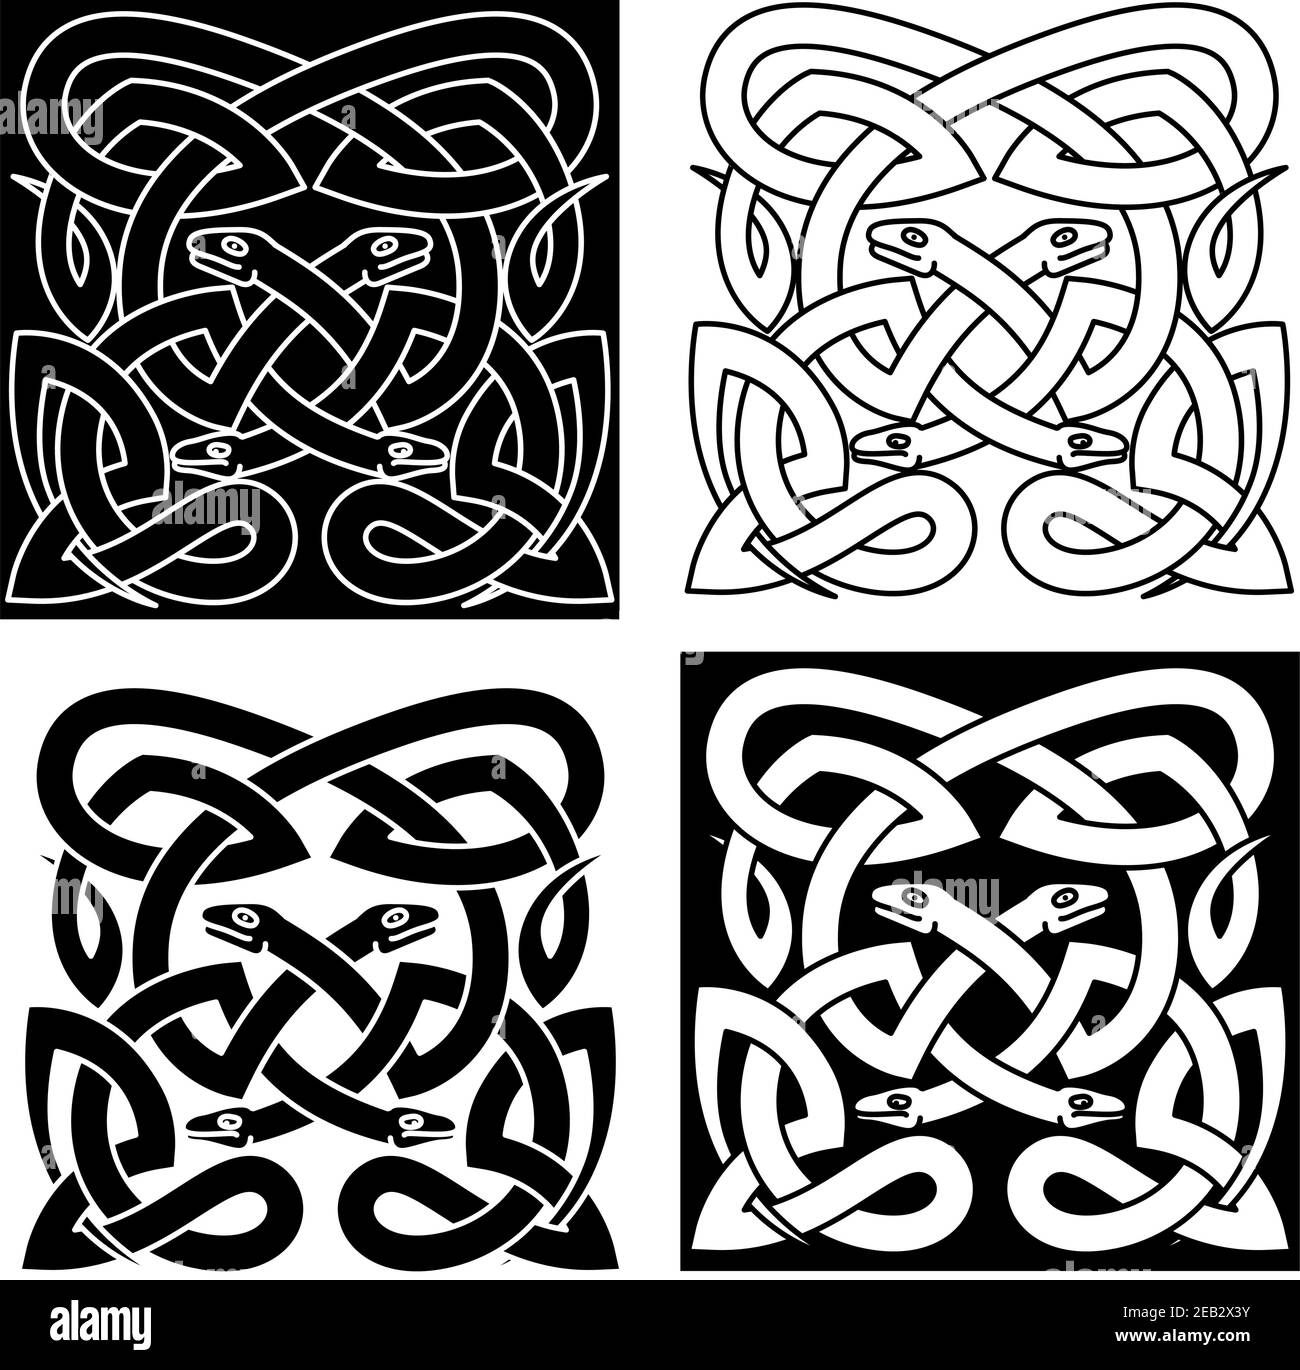 Medieval celtic reptile knot pattern with mythical snakes, for tattoo or t-shirt design Stock Vector